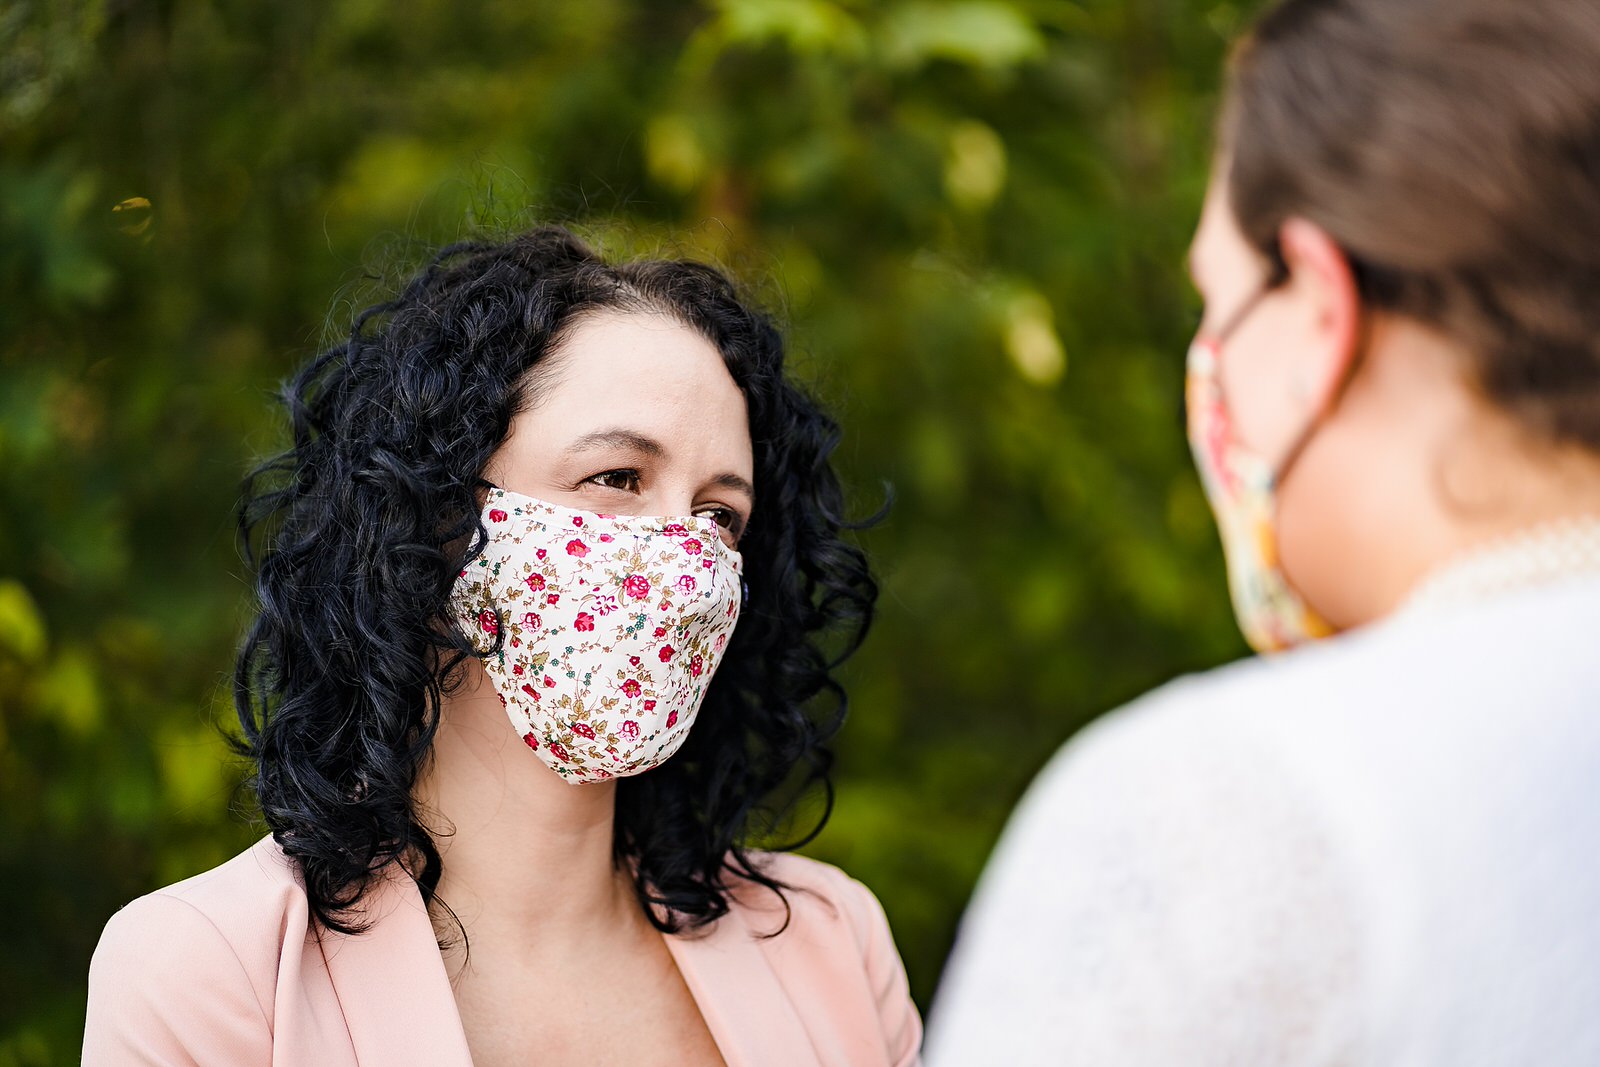 Bride wears a mask during an intimate elopement wedding after their big wedding was postponed due to Covid19